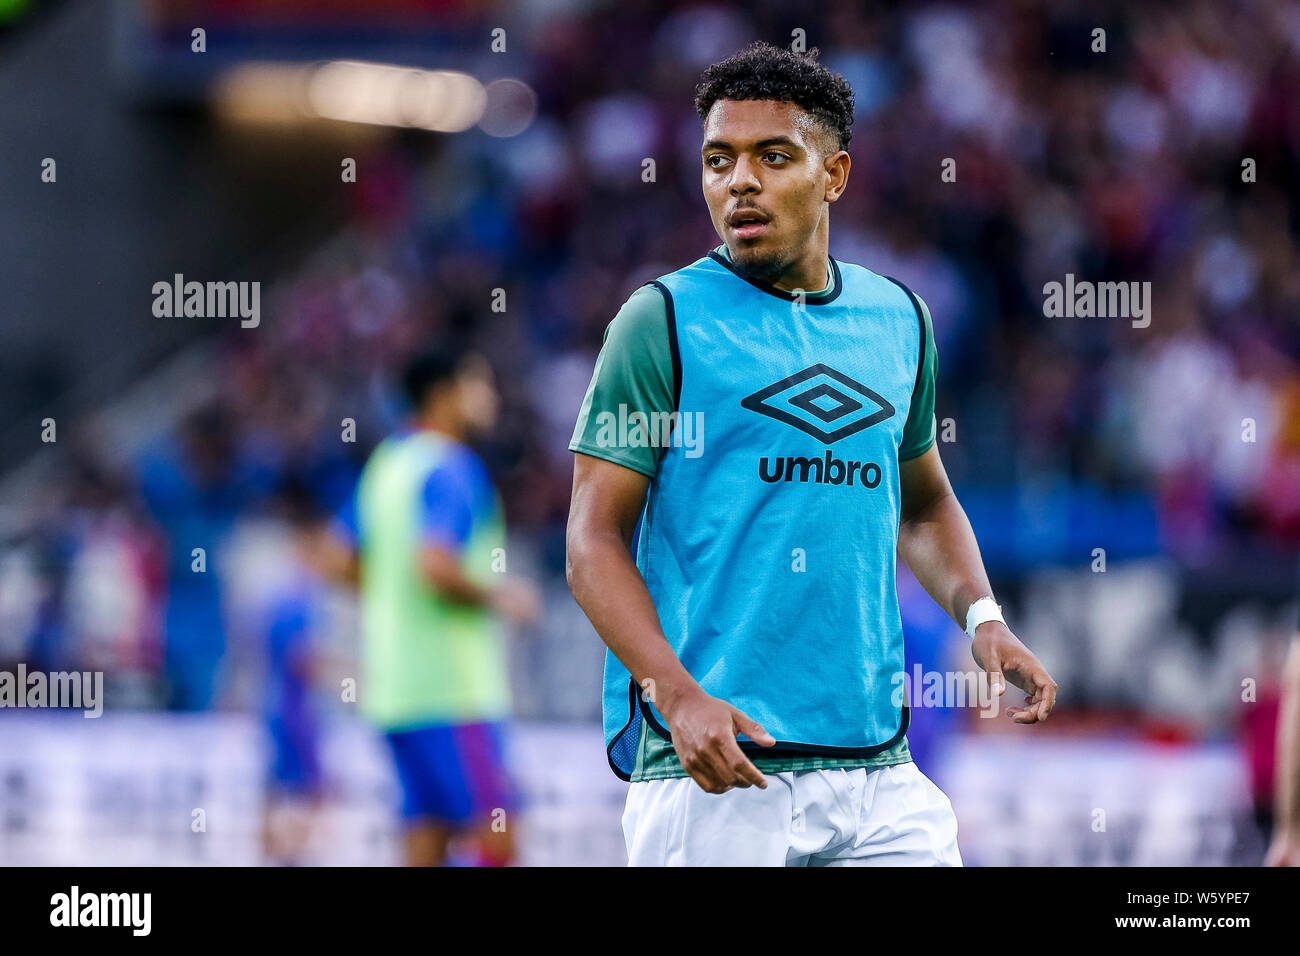 Donyell Malen Champions League High Resolution Stock Photography and ...